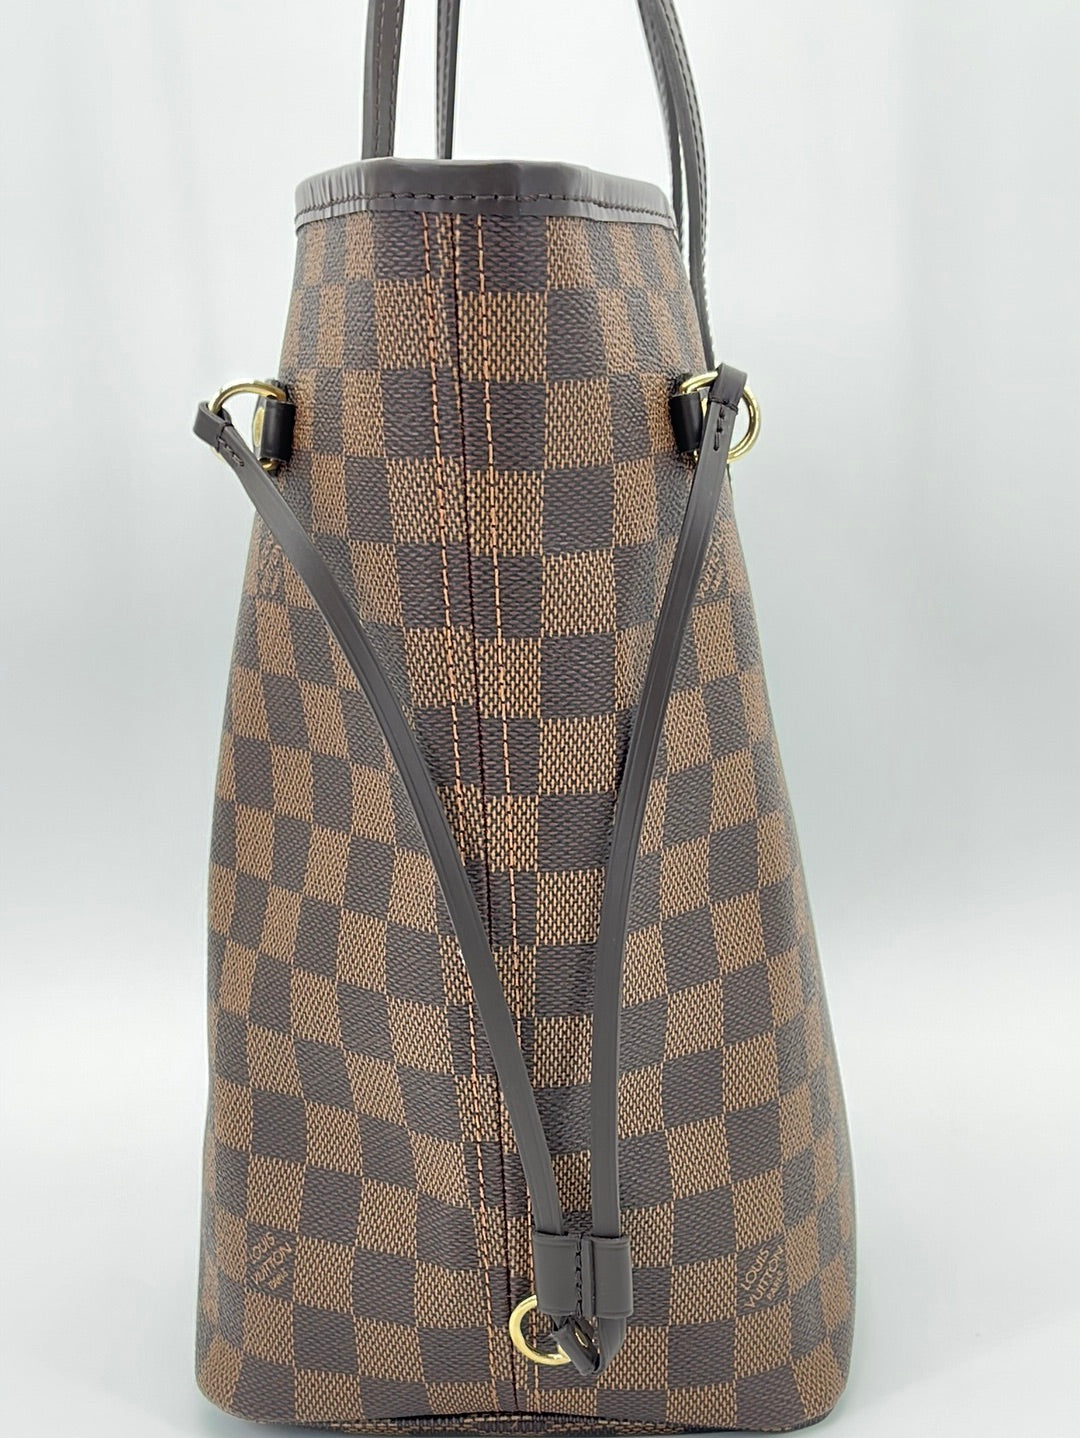 Authenticated Used Louis Vuitton Damier Neverfull PM N41359 Tote Bag 0074  LOUIS VUITTON 